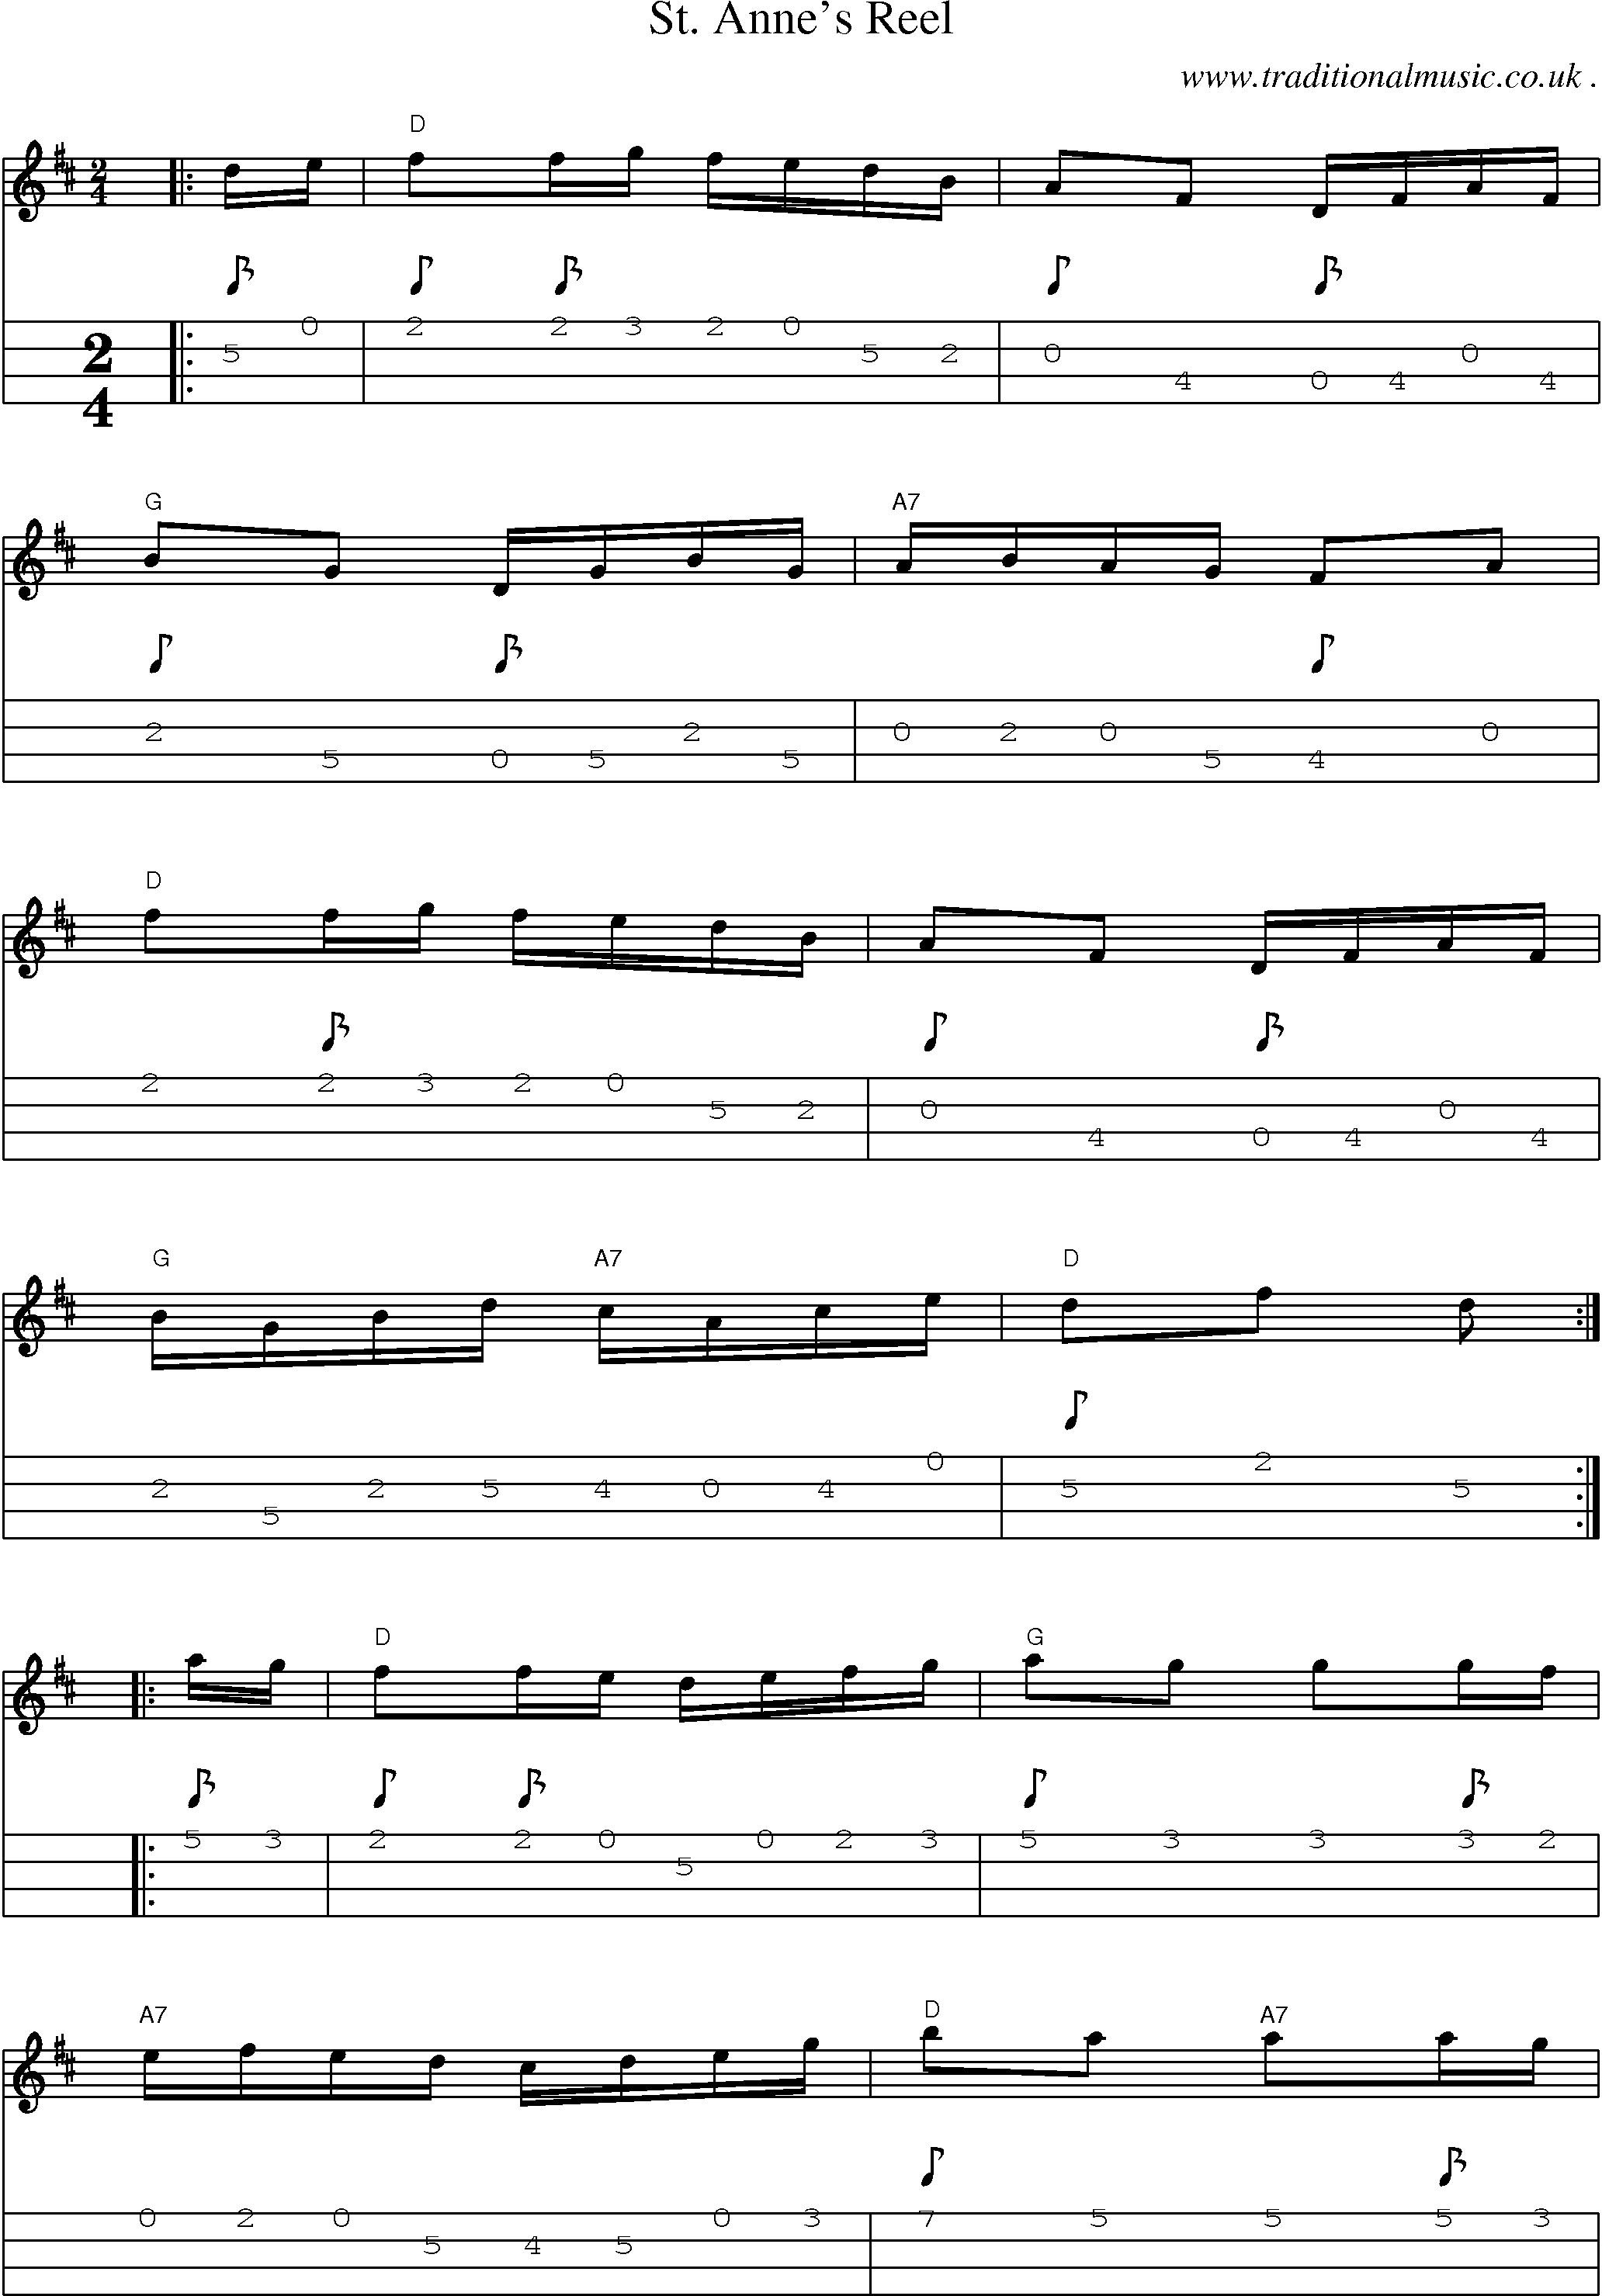 Music Score and Guitar Tabs for St Annes Reel